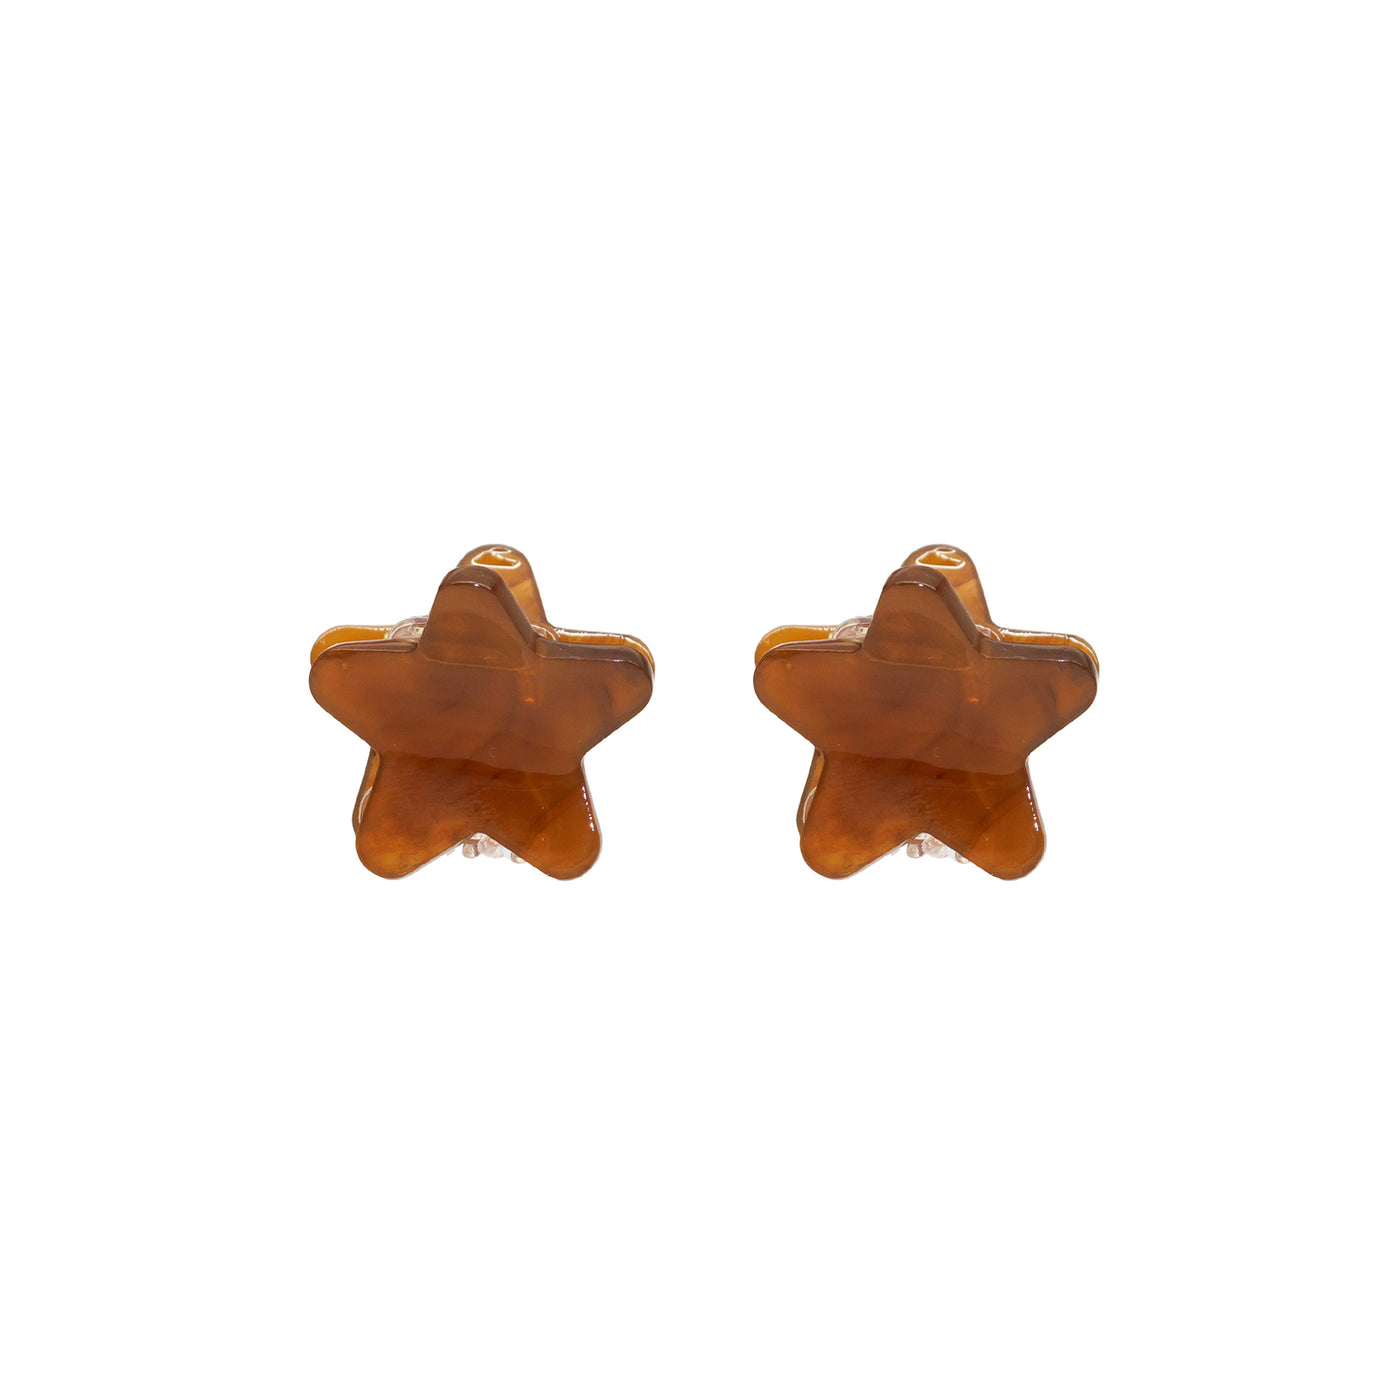 Baby Star Clip Set in Gingerbread